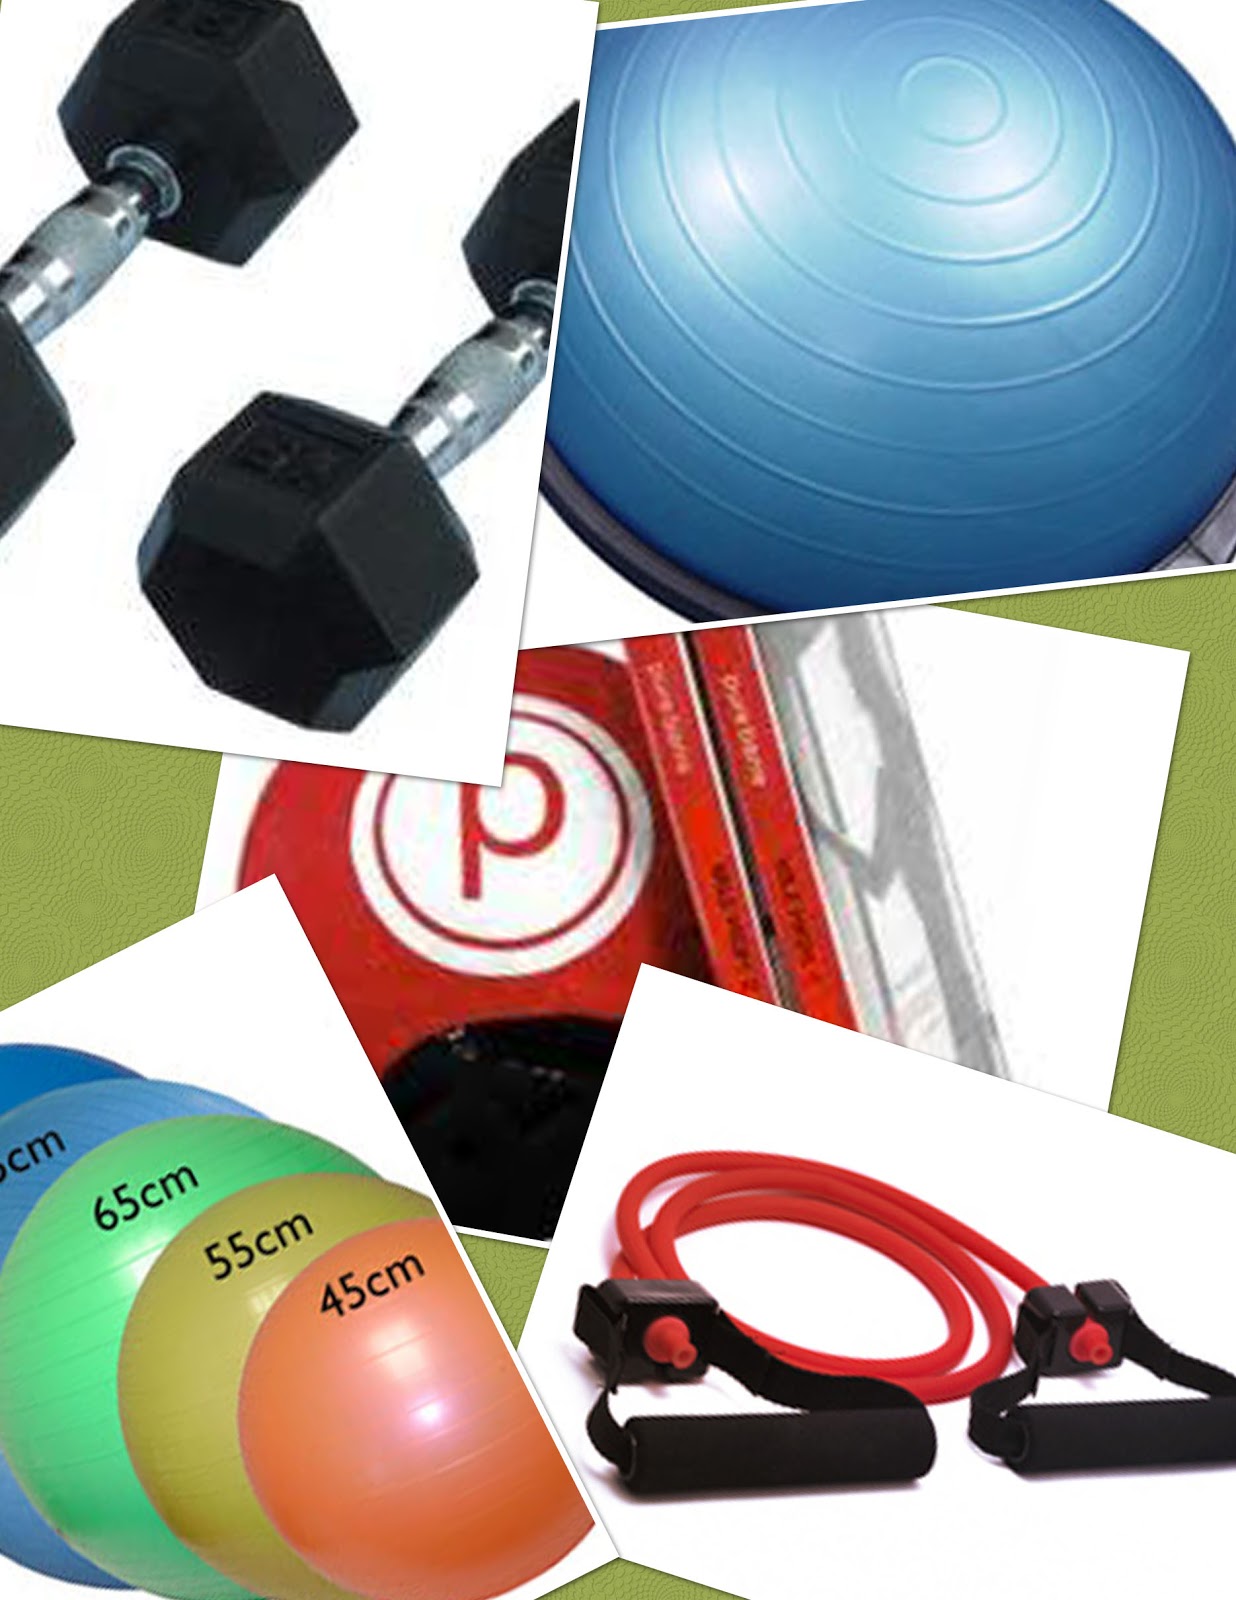 Our Southern Roots: Fit Friday...At Home Fitness Equipment